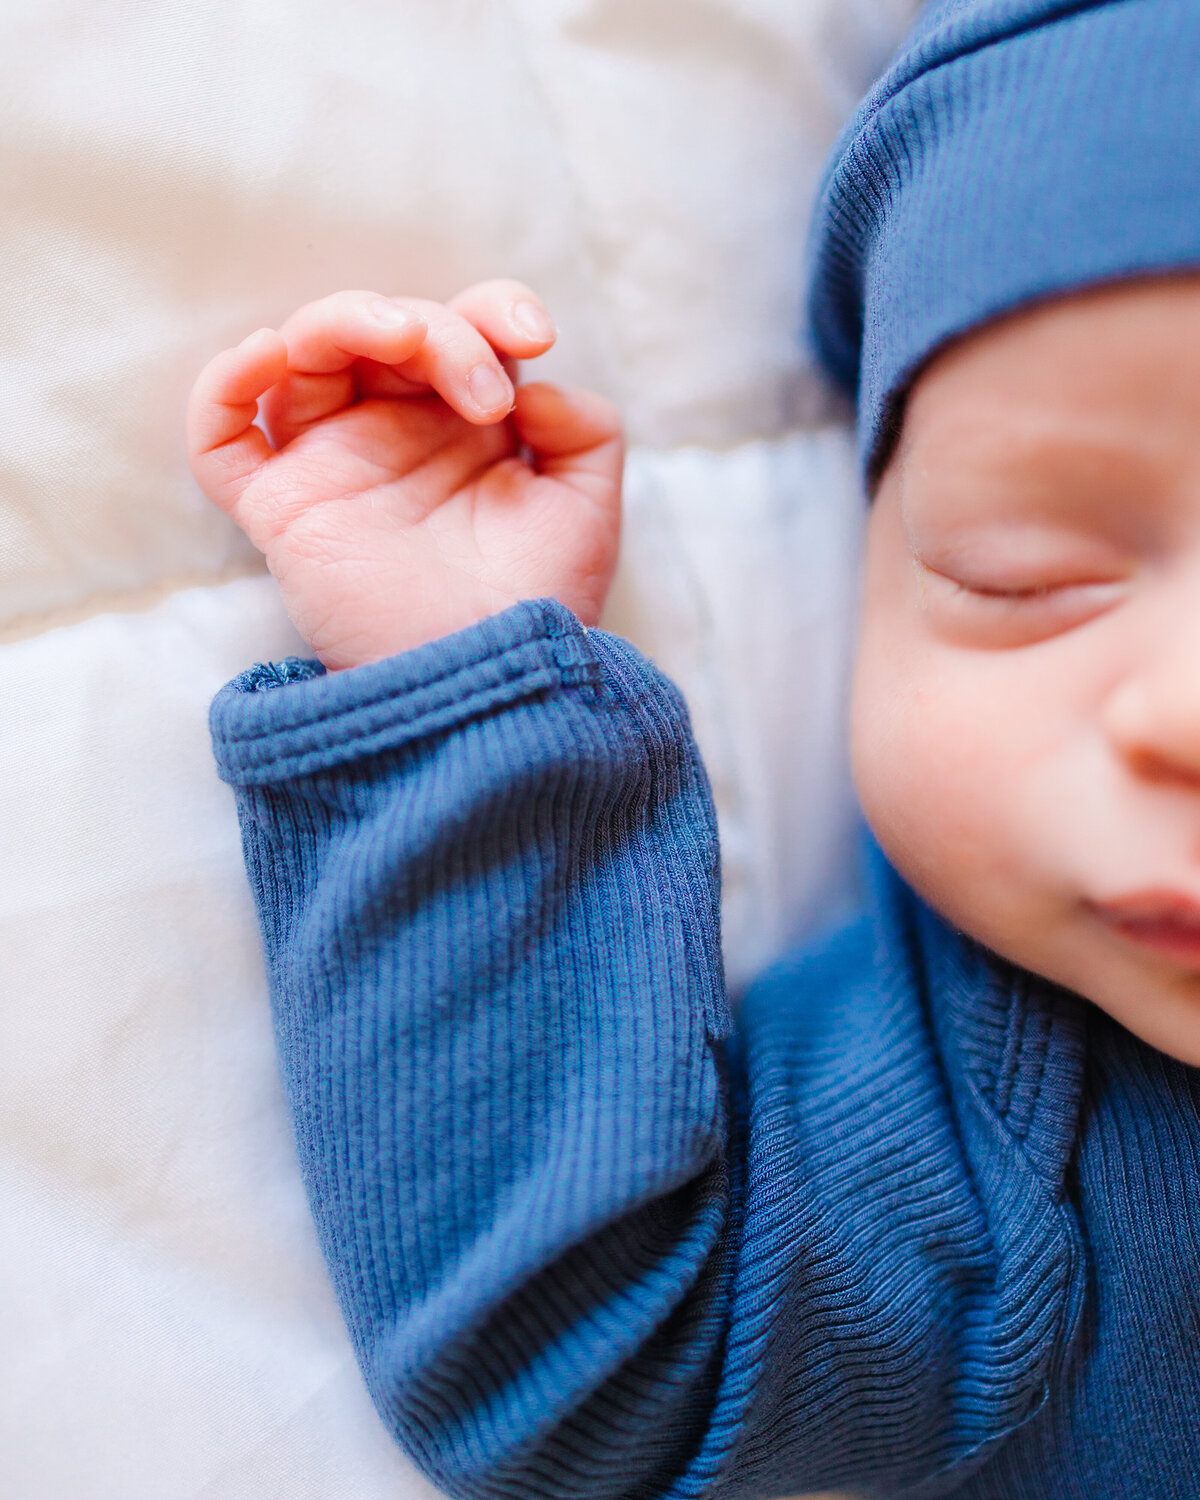 Photograph of the hand and face of a newborn baby dressed in a dark blue outfit